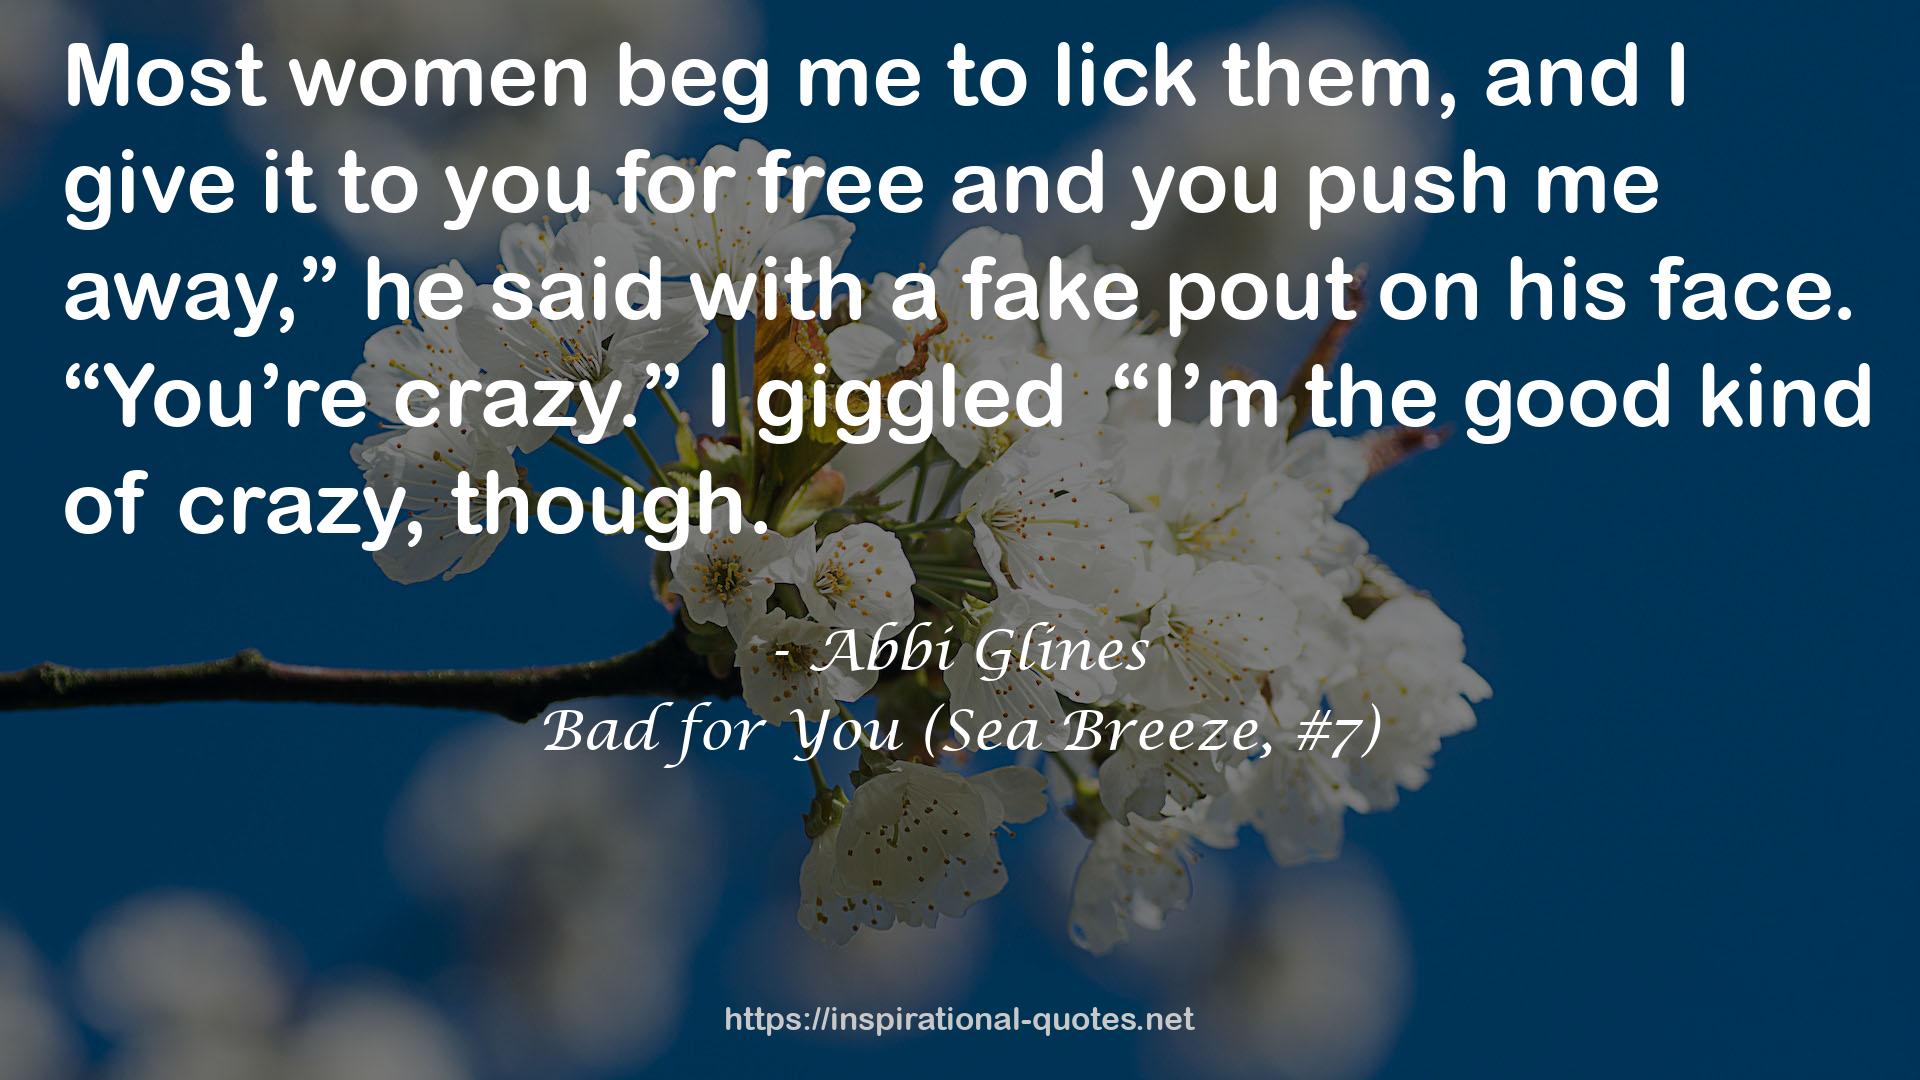 Bad for You (Sea Breeze, #7) QUOTES